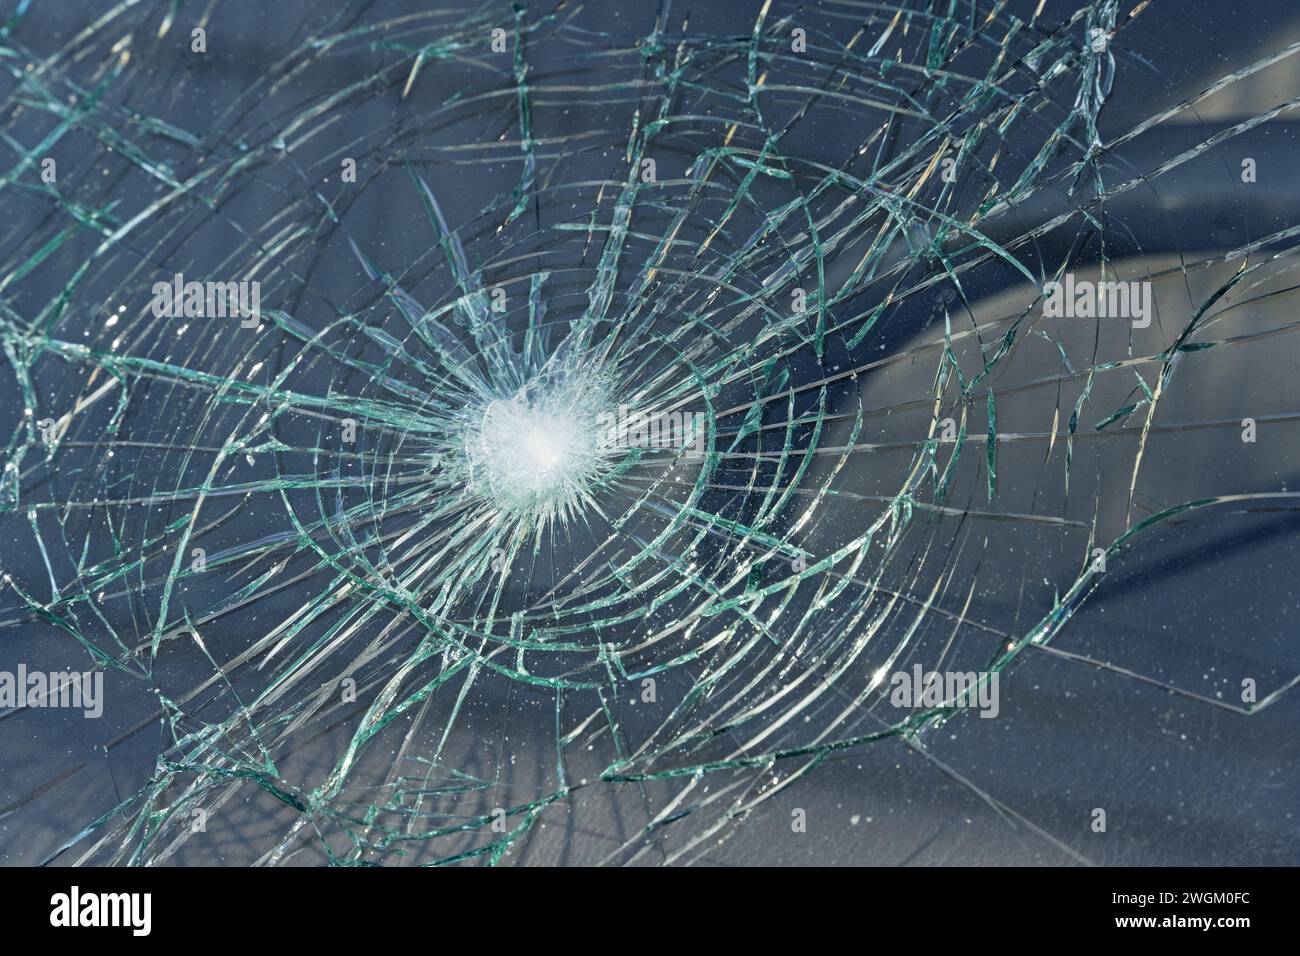 detail of smashed and shattered glass car windshield Stock Photo